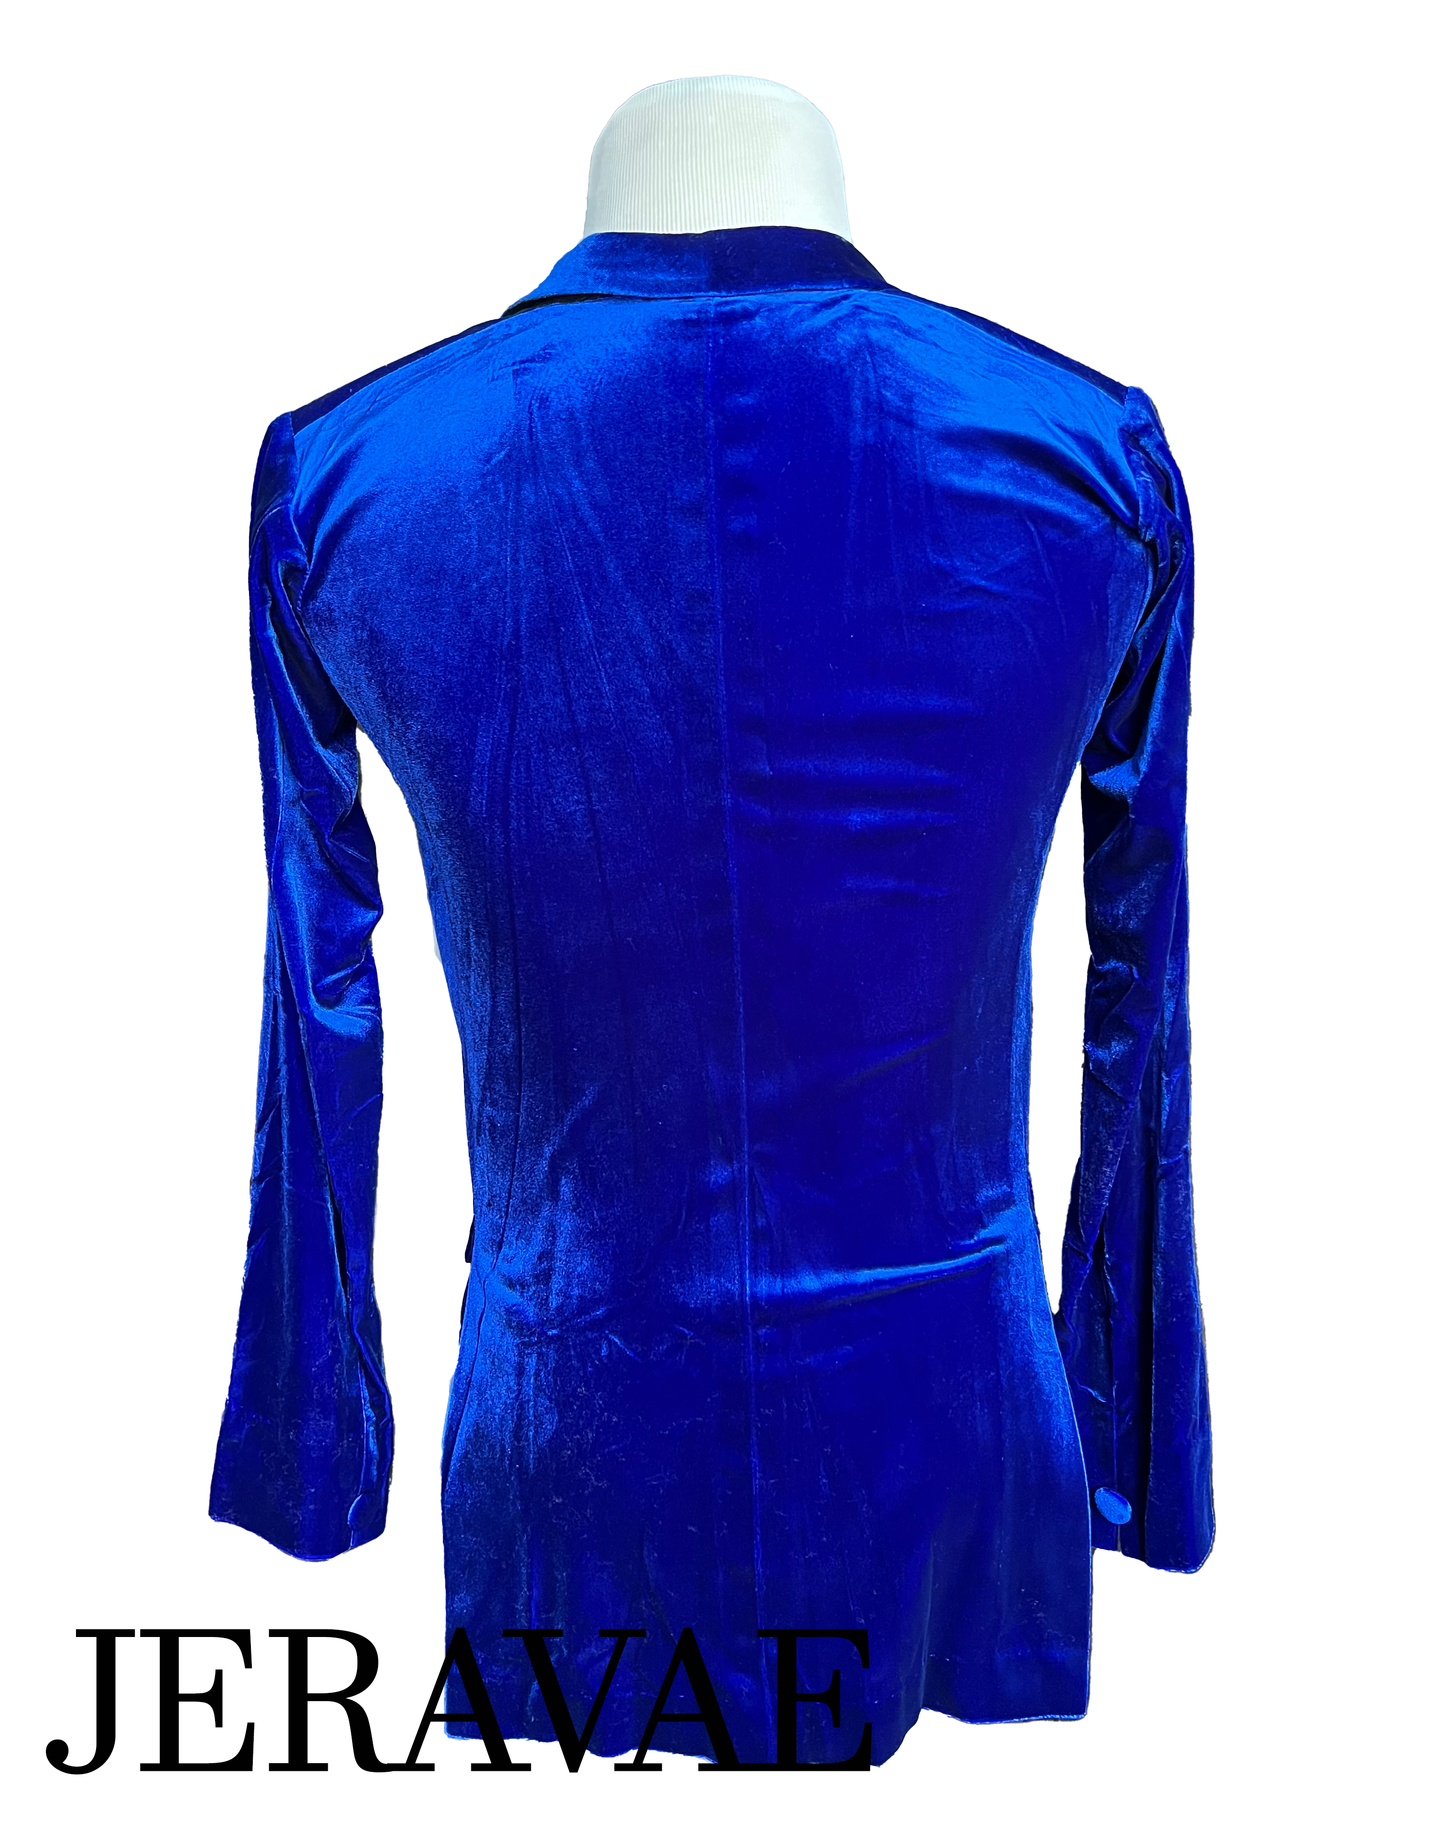 Men's Velvet Single Breasted Smooth Ballroom Suit Jacket Available in Blue, Red, and Black Ja002 in Stock